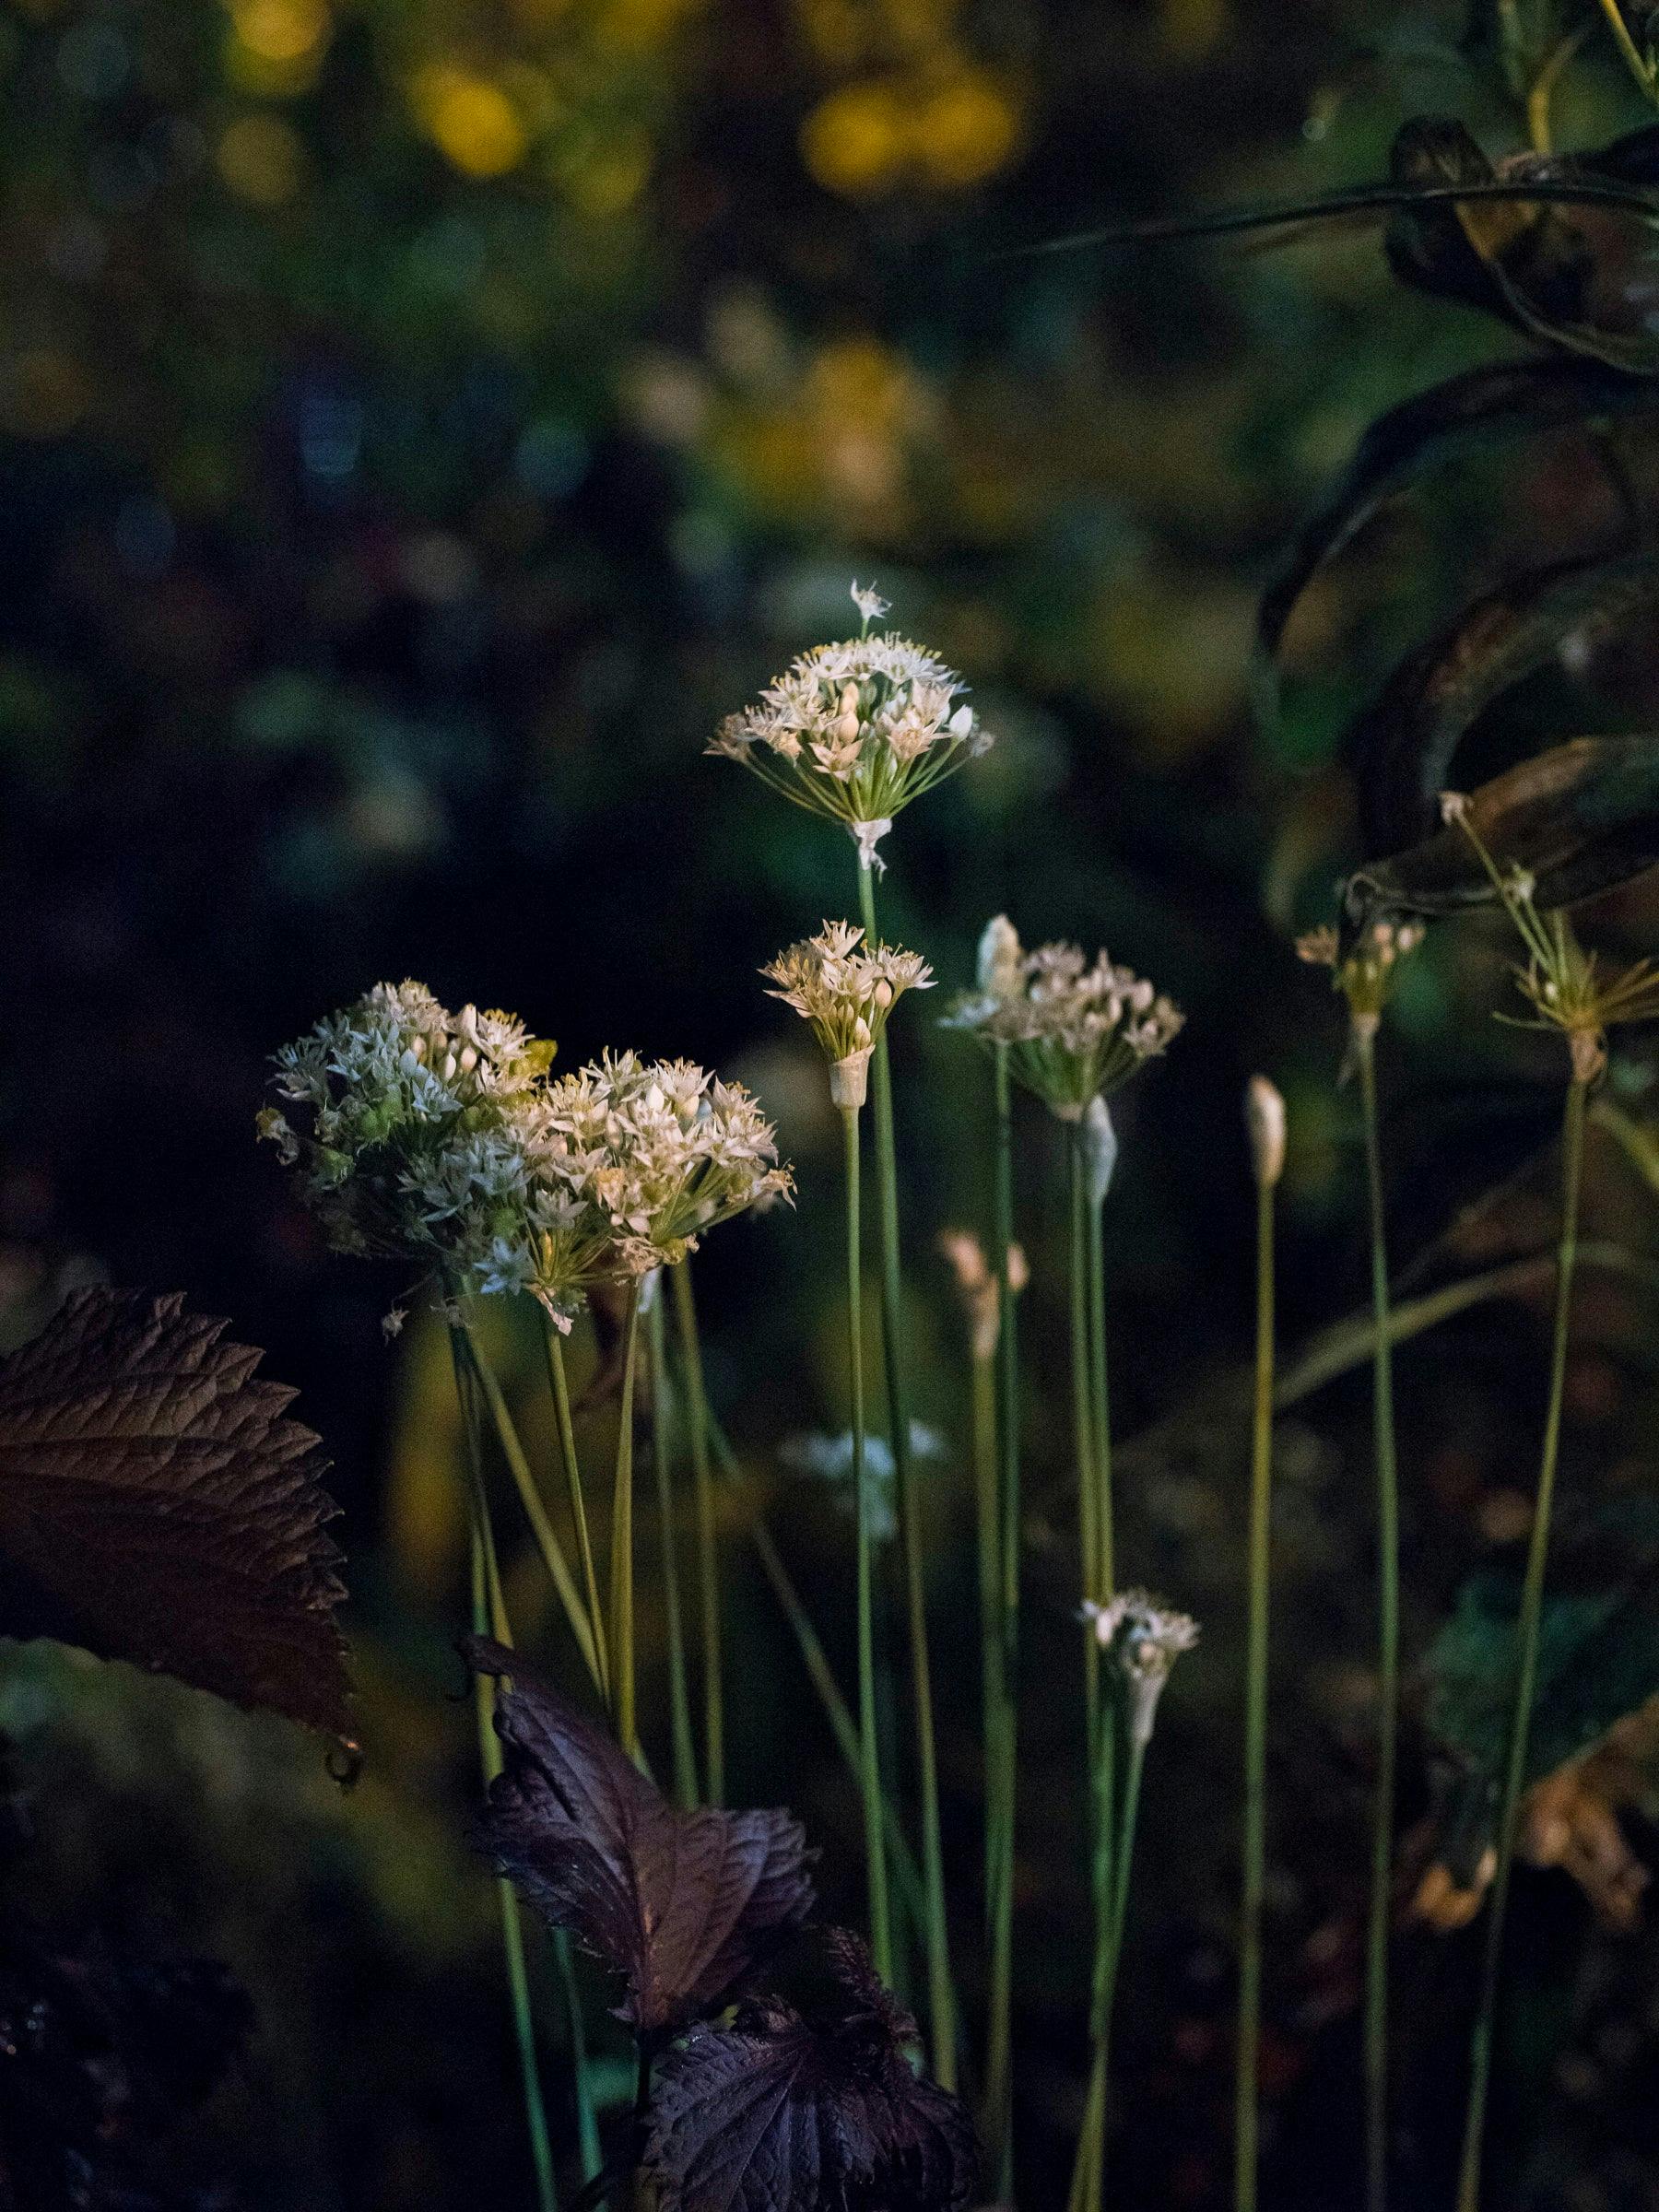 Photography by Anna Beeke titled "Midnight in the Garden #151".